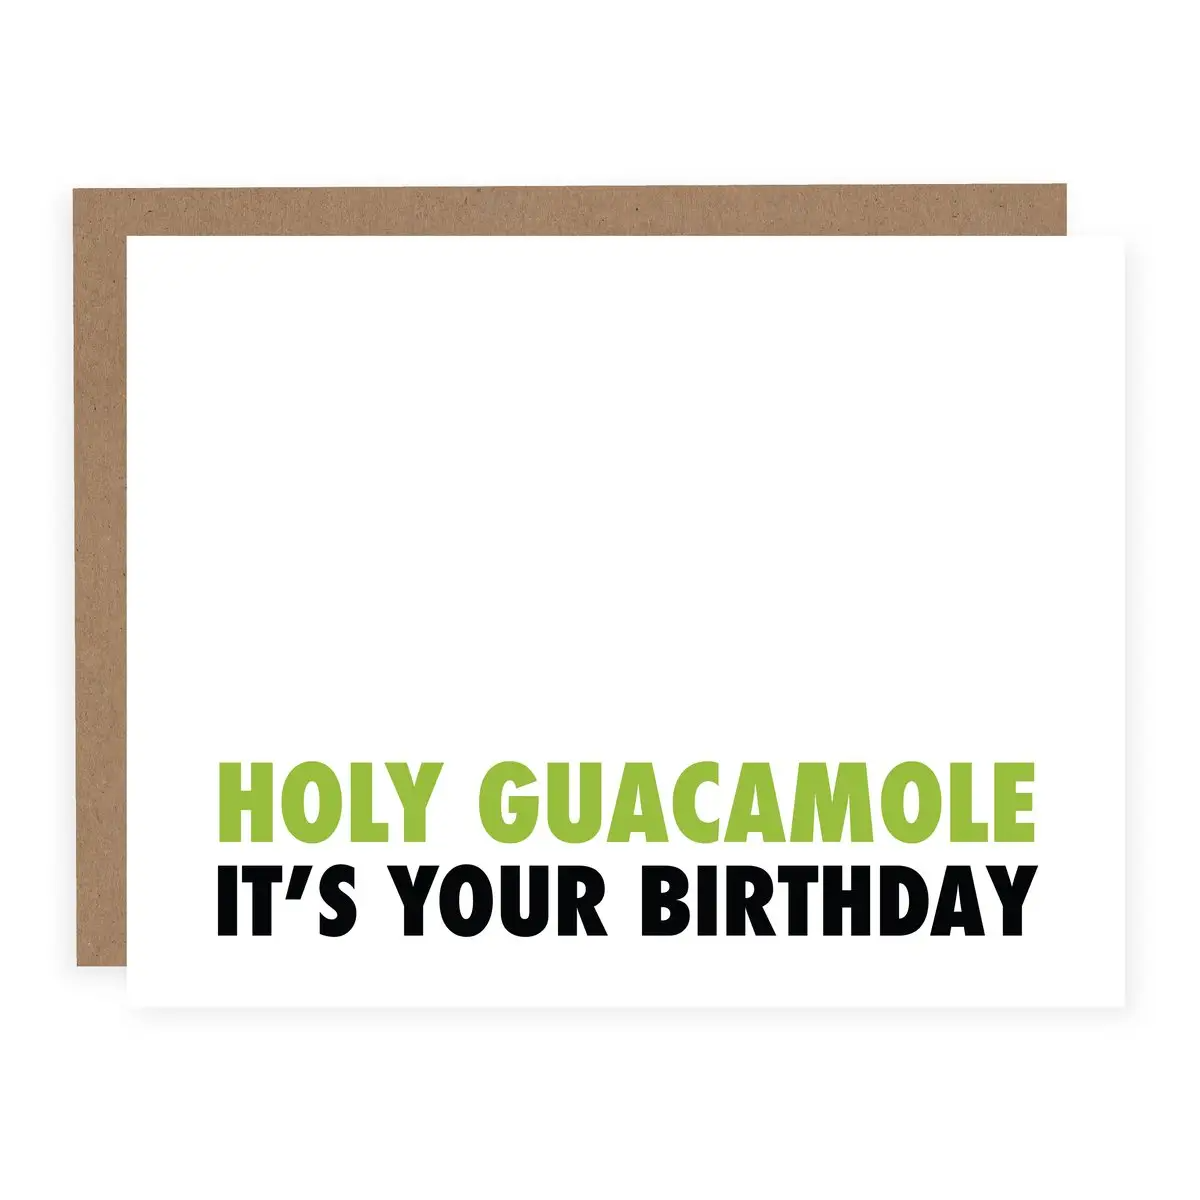 Holy Guacamole It's Your Birthday Card - Mellow Monkey